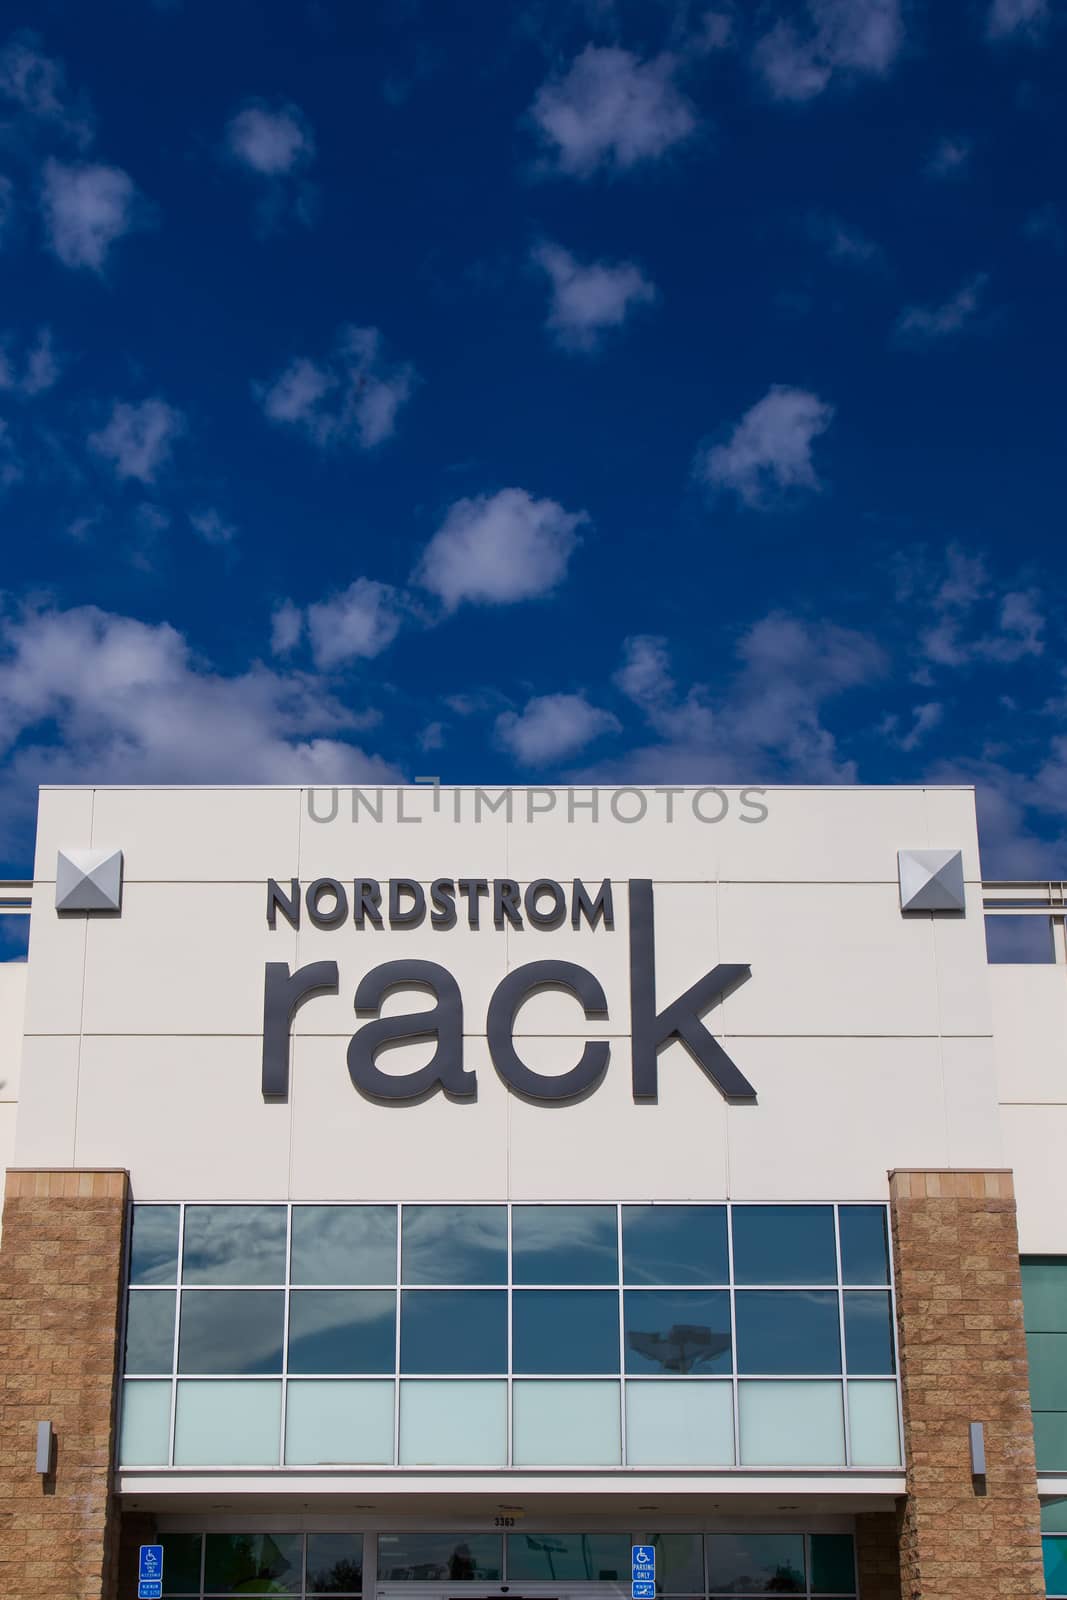 PASADENA, CA/USA - OCTOBER 25, 2014:  Nordstrom Rack retail store exterior. Nordstrom, Inc. is an American upscale fashion retailer.